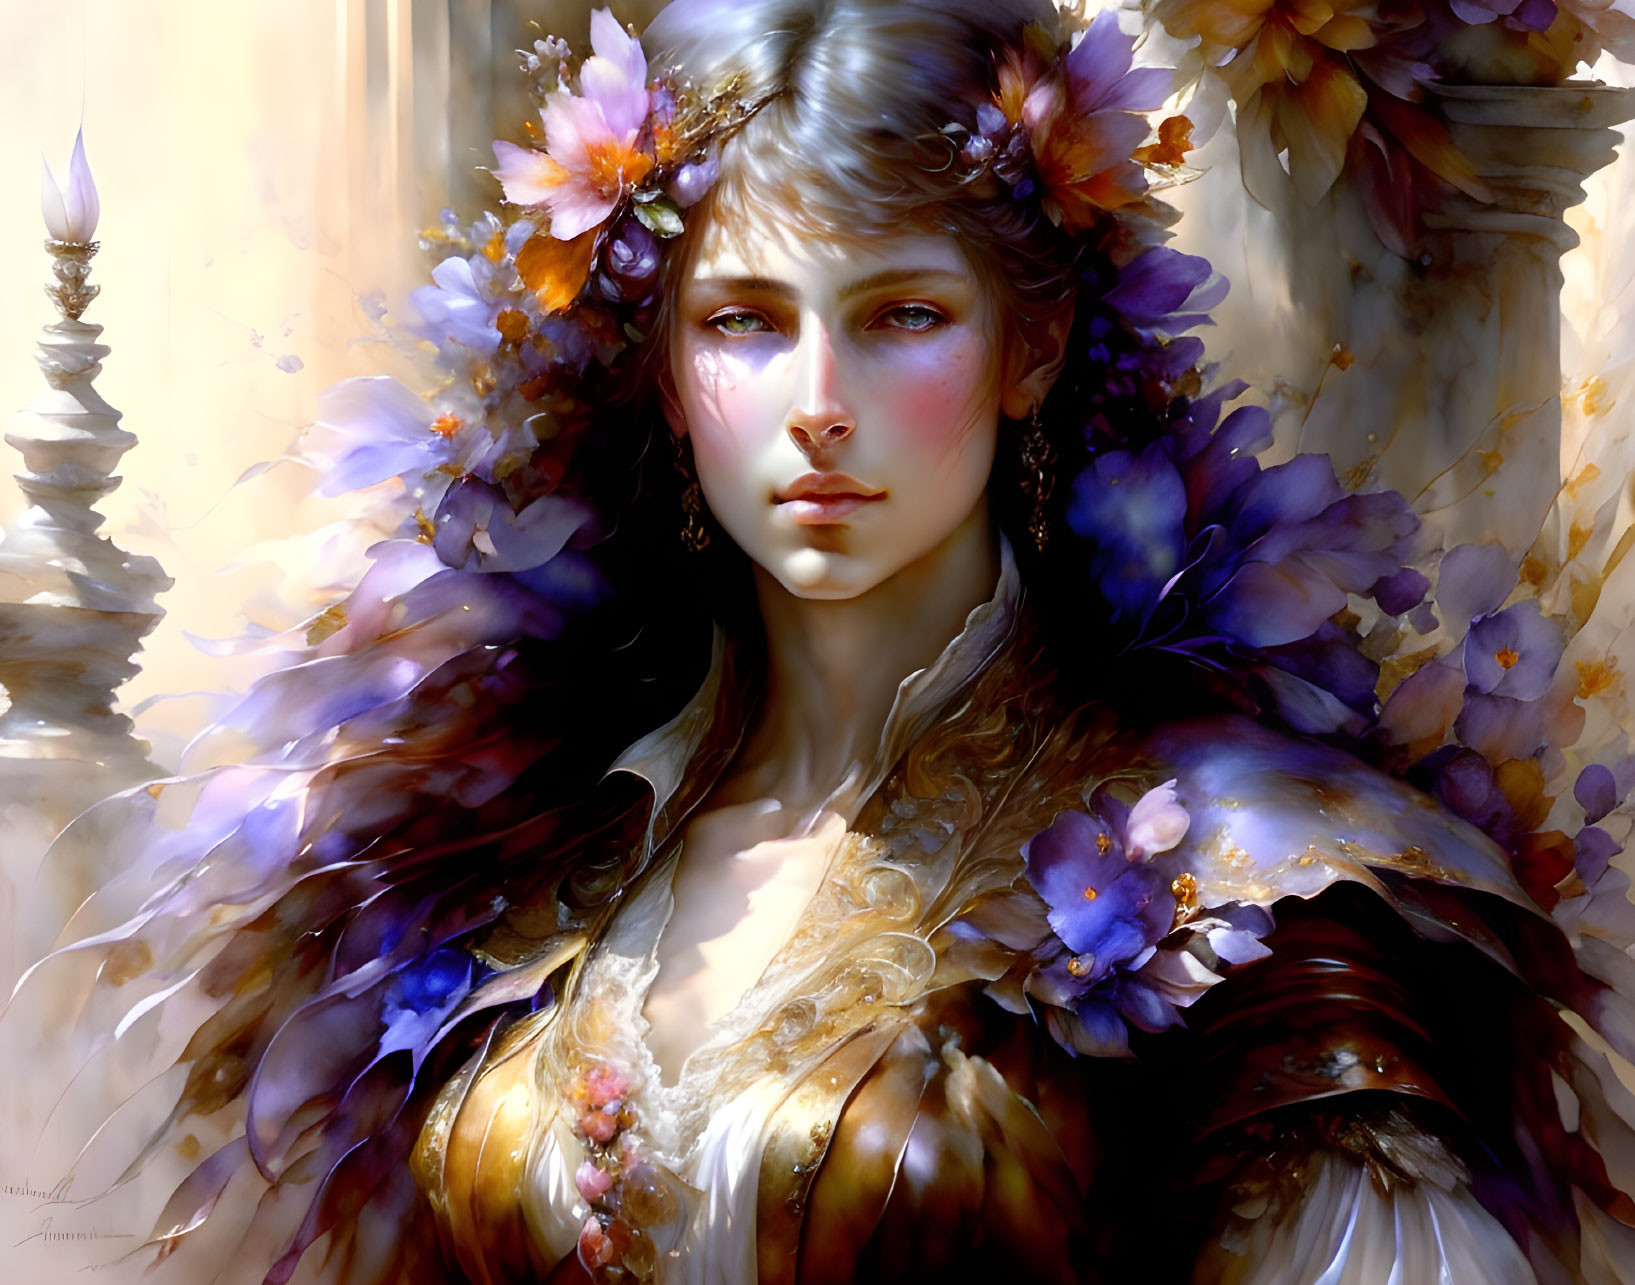 Fantastical woman portrait with floral hair adornments and purple-gold cloak